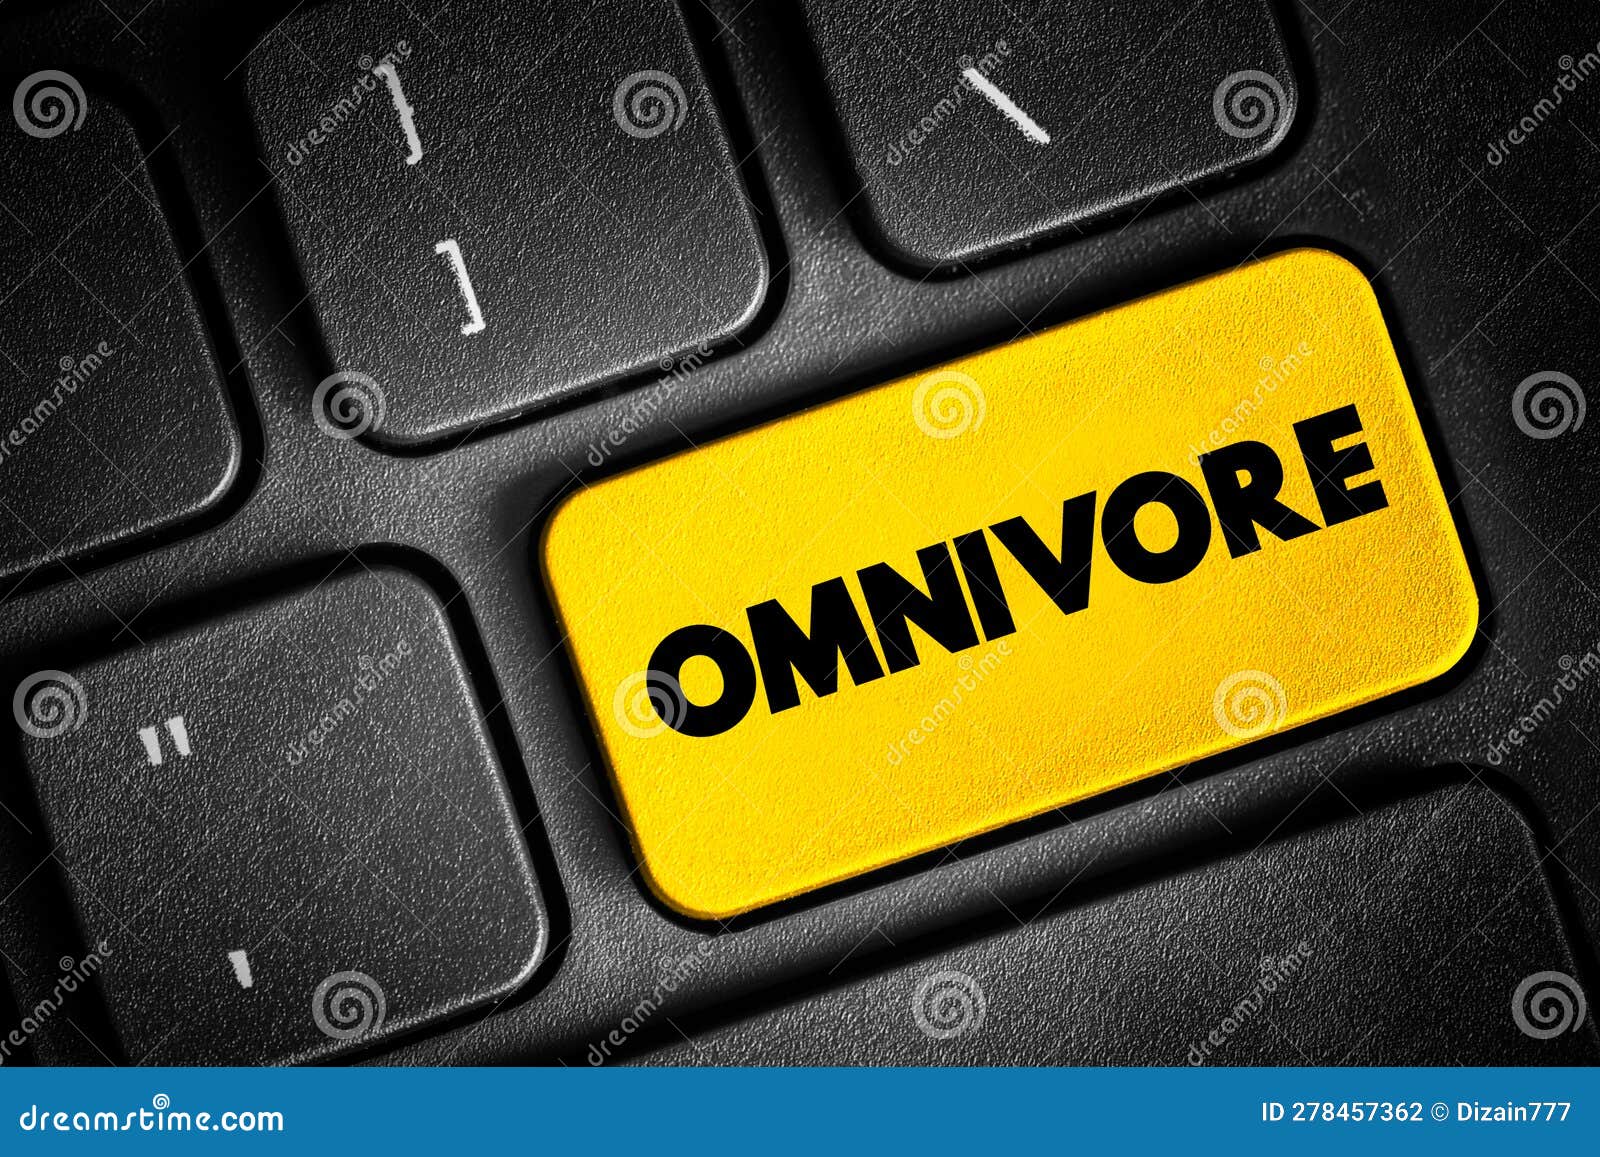 omnivore is an organism that eats plants and animals, text button on keyboard, concept background